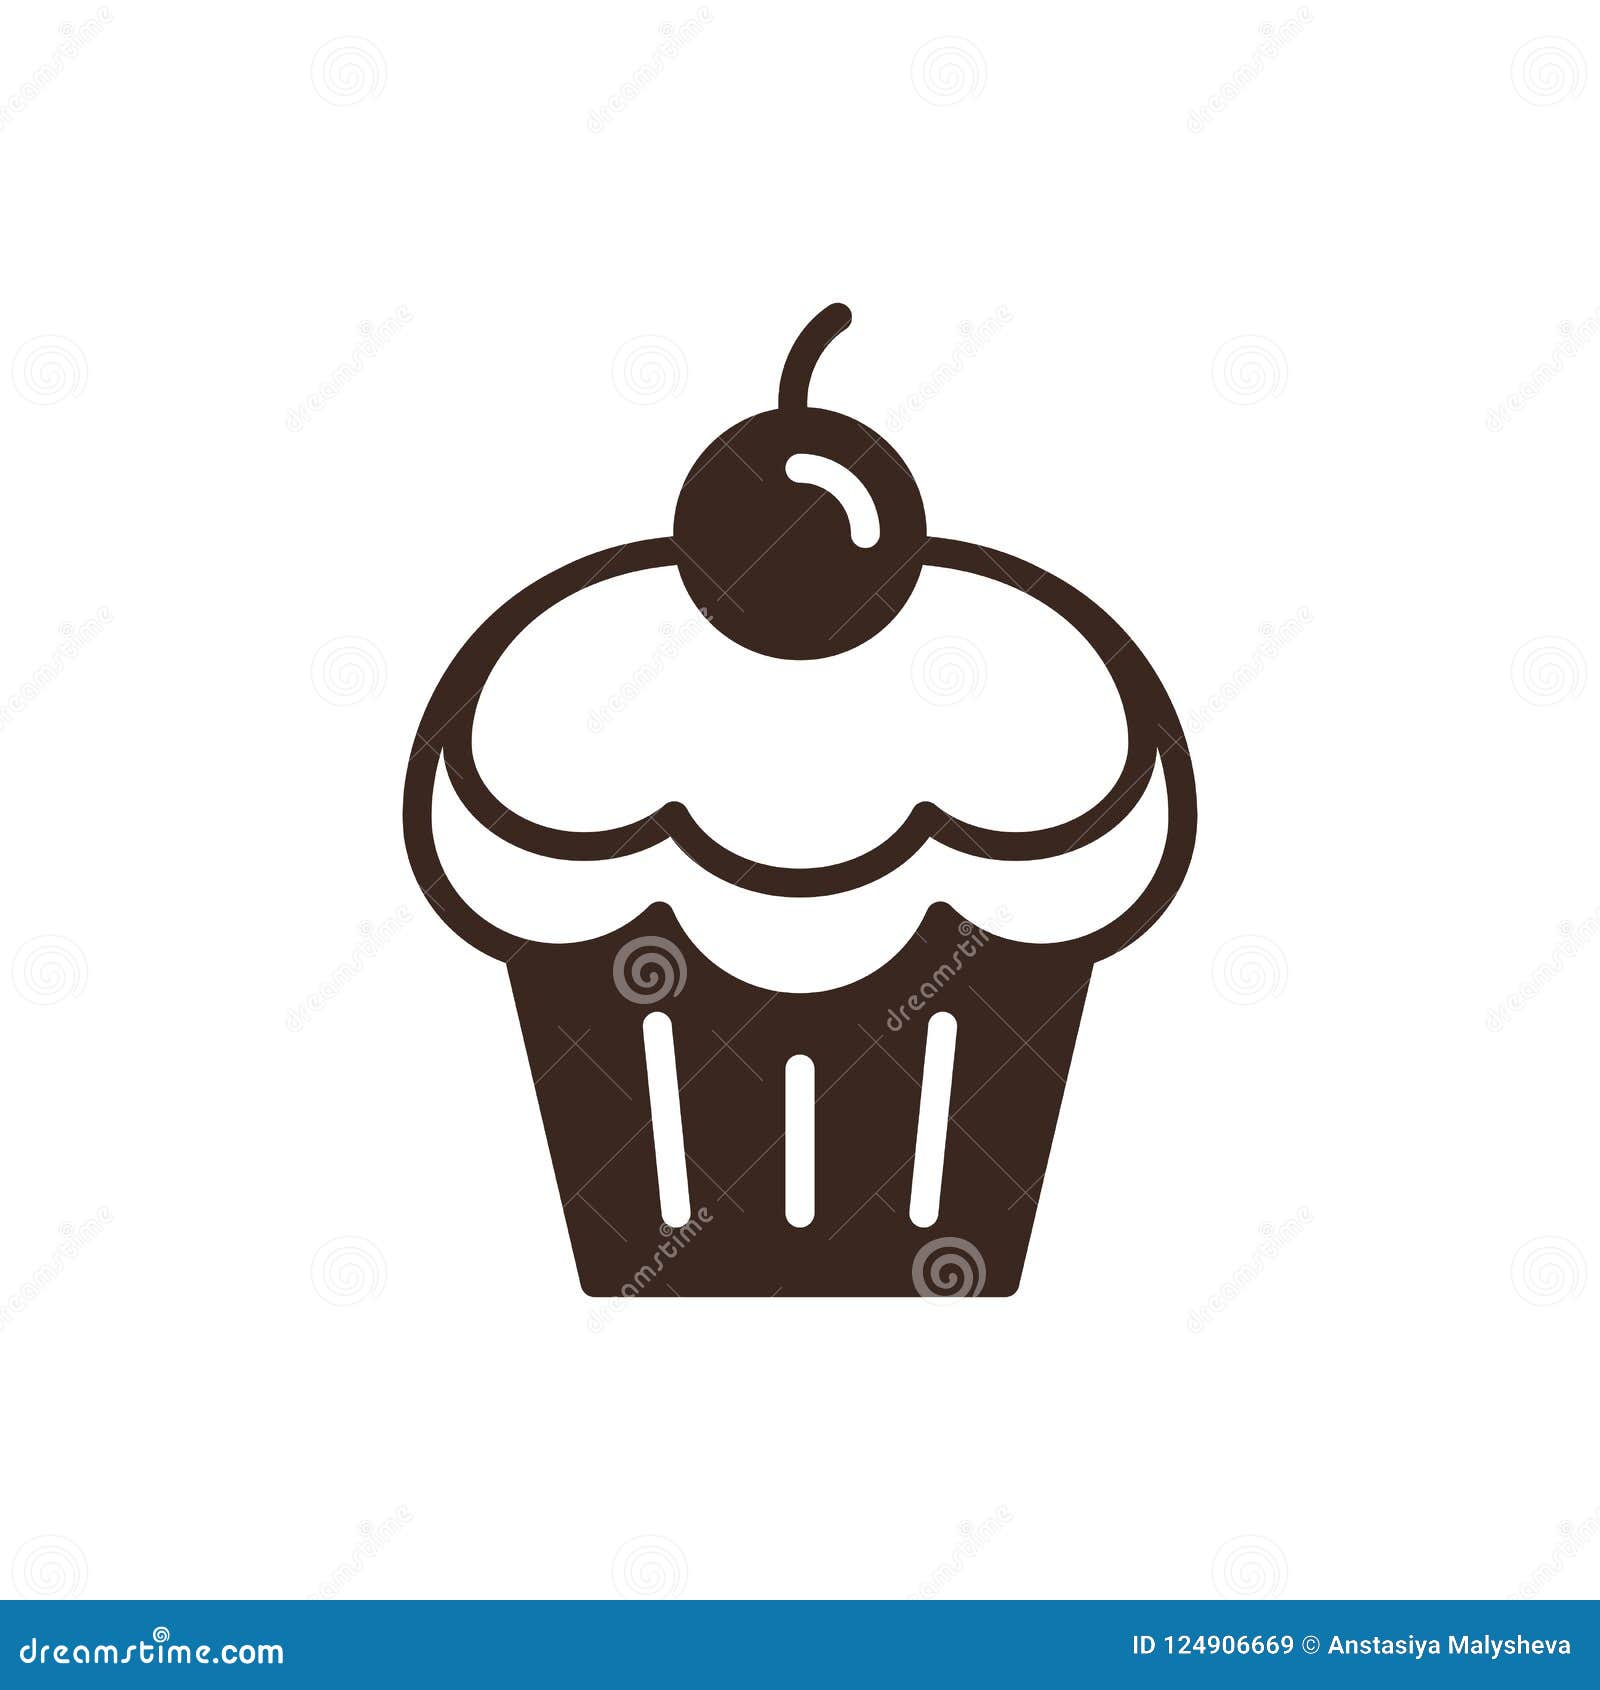 Cherry Cupcake Linear Style Icon Stock Vector - Illustration of muffin ...